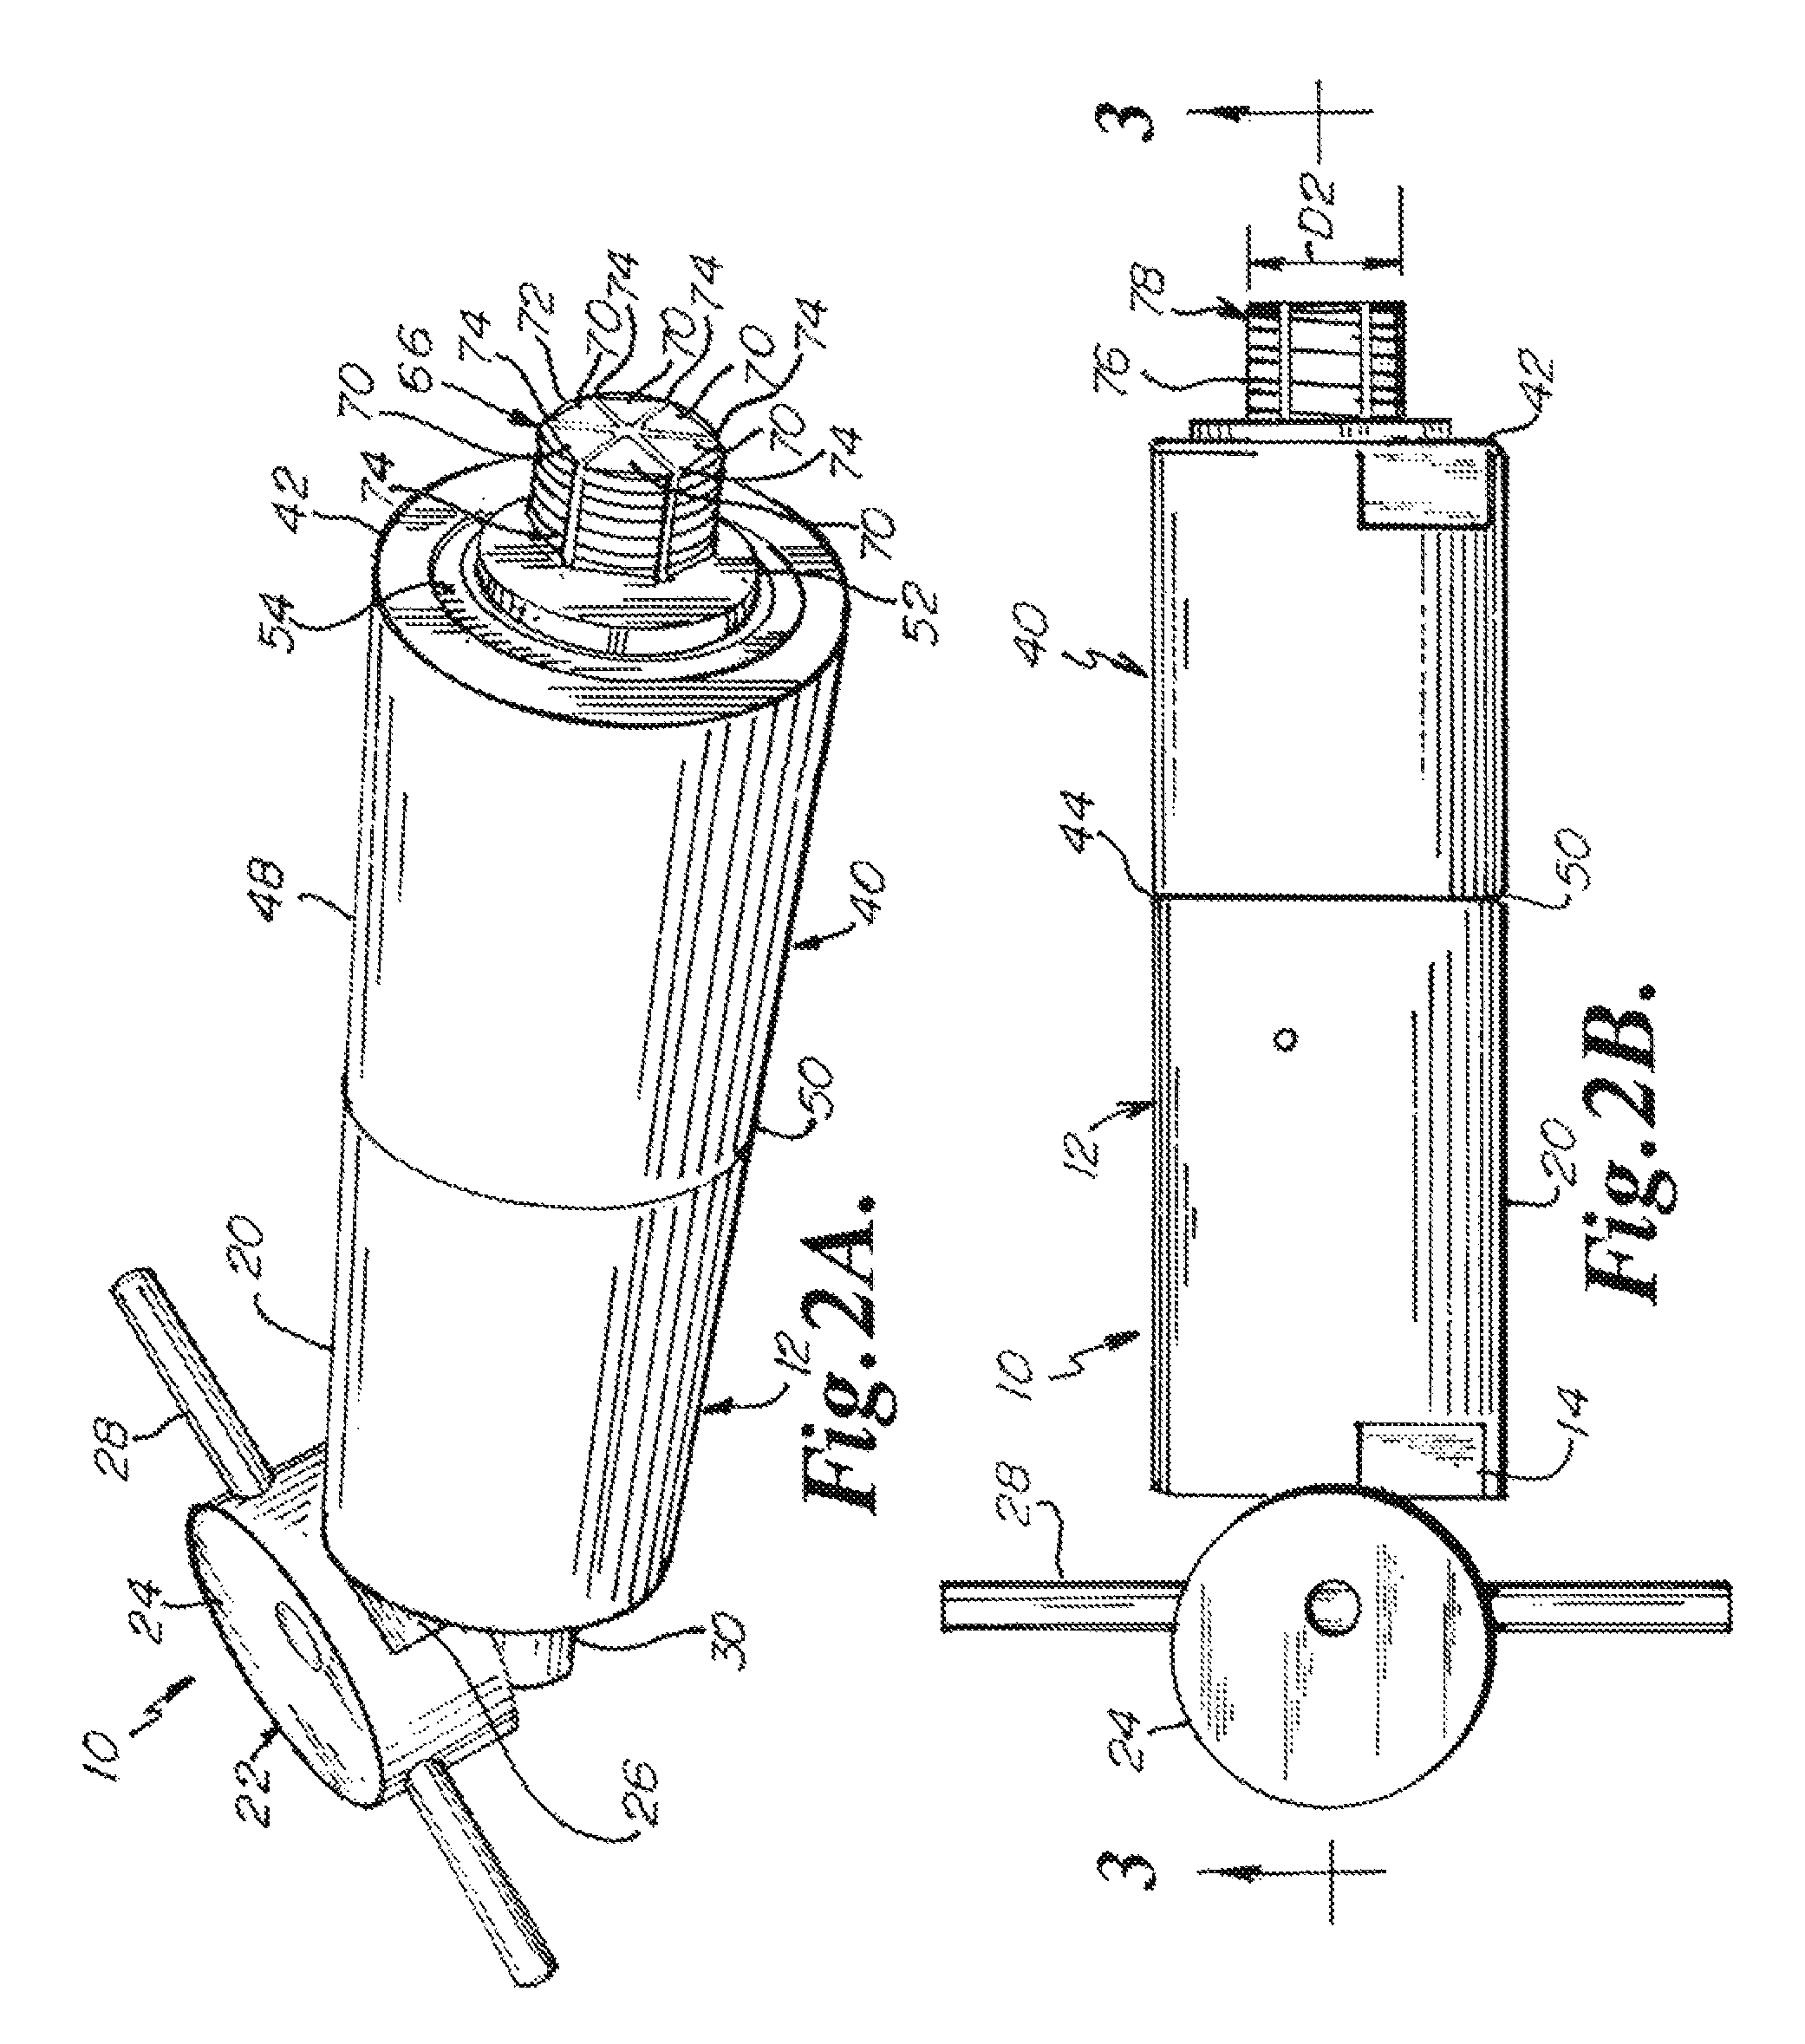 Hydrostatic testing tool and methods of use